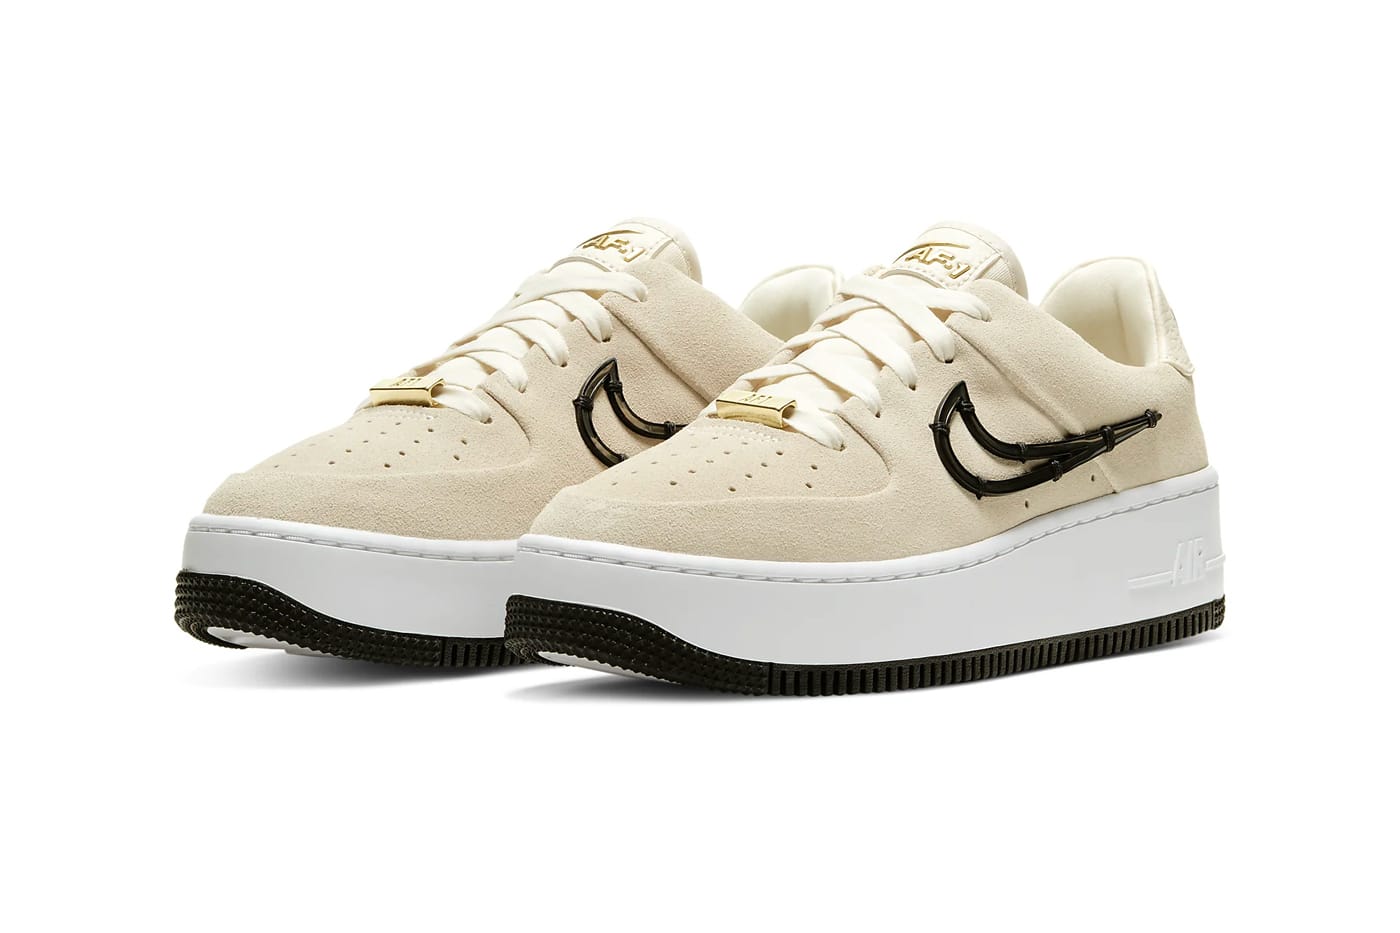 nike wmns air force 1 sage low